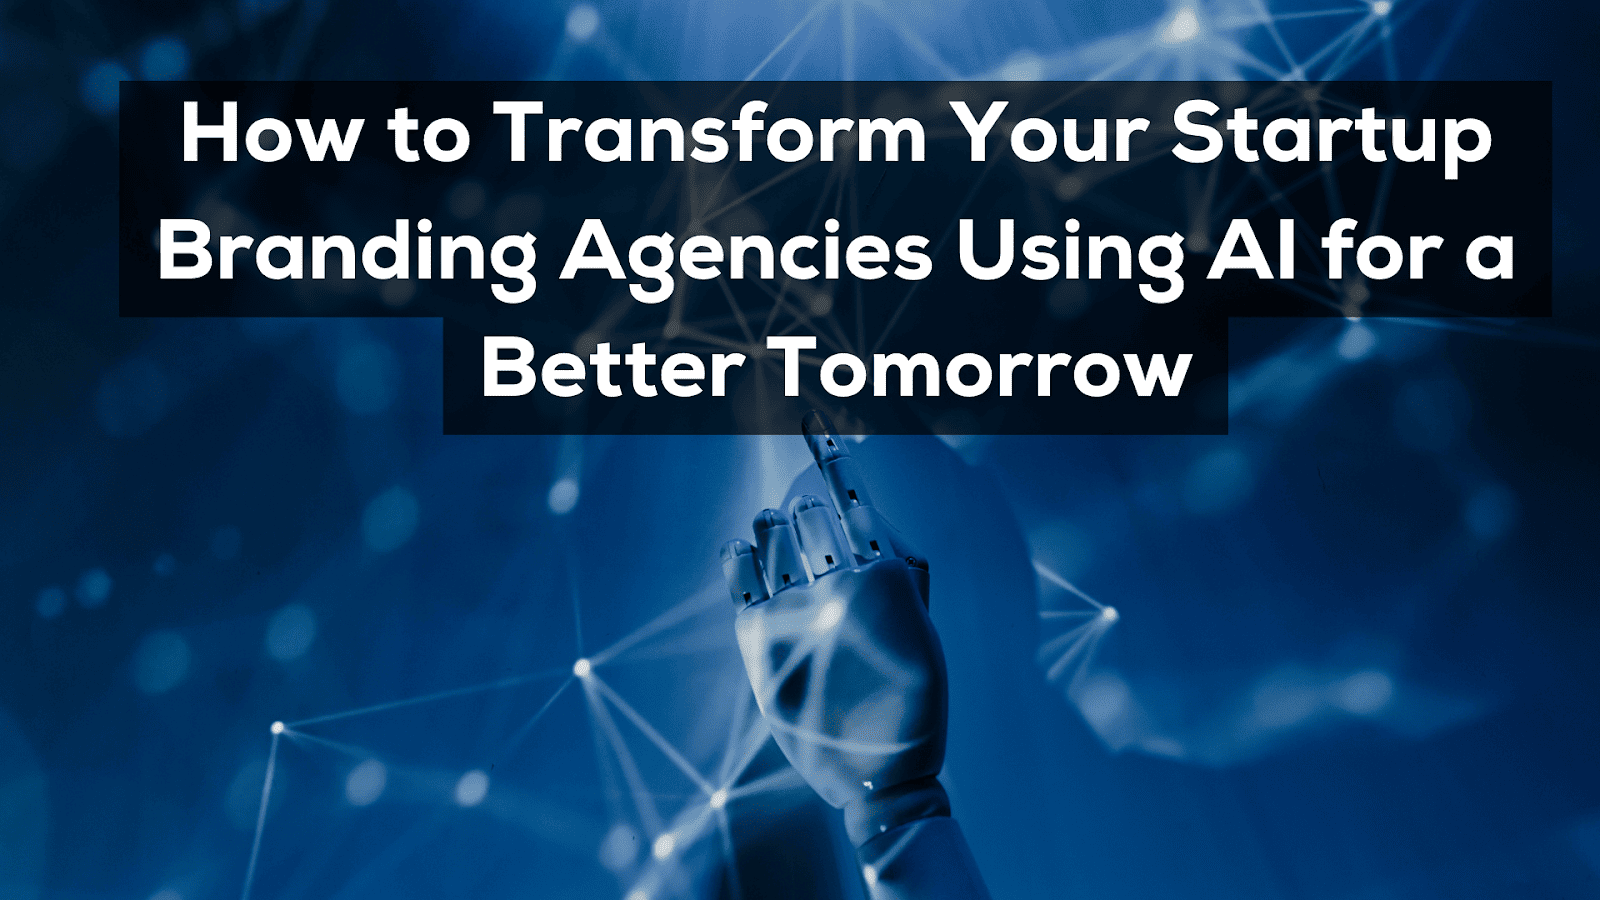 How to Transform Your Startup Branding Agencies Using AI for a Better Tomorrow